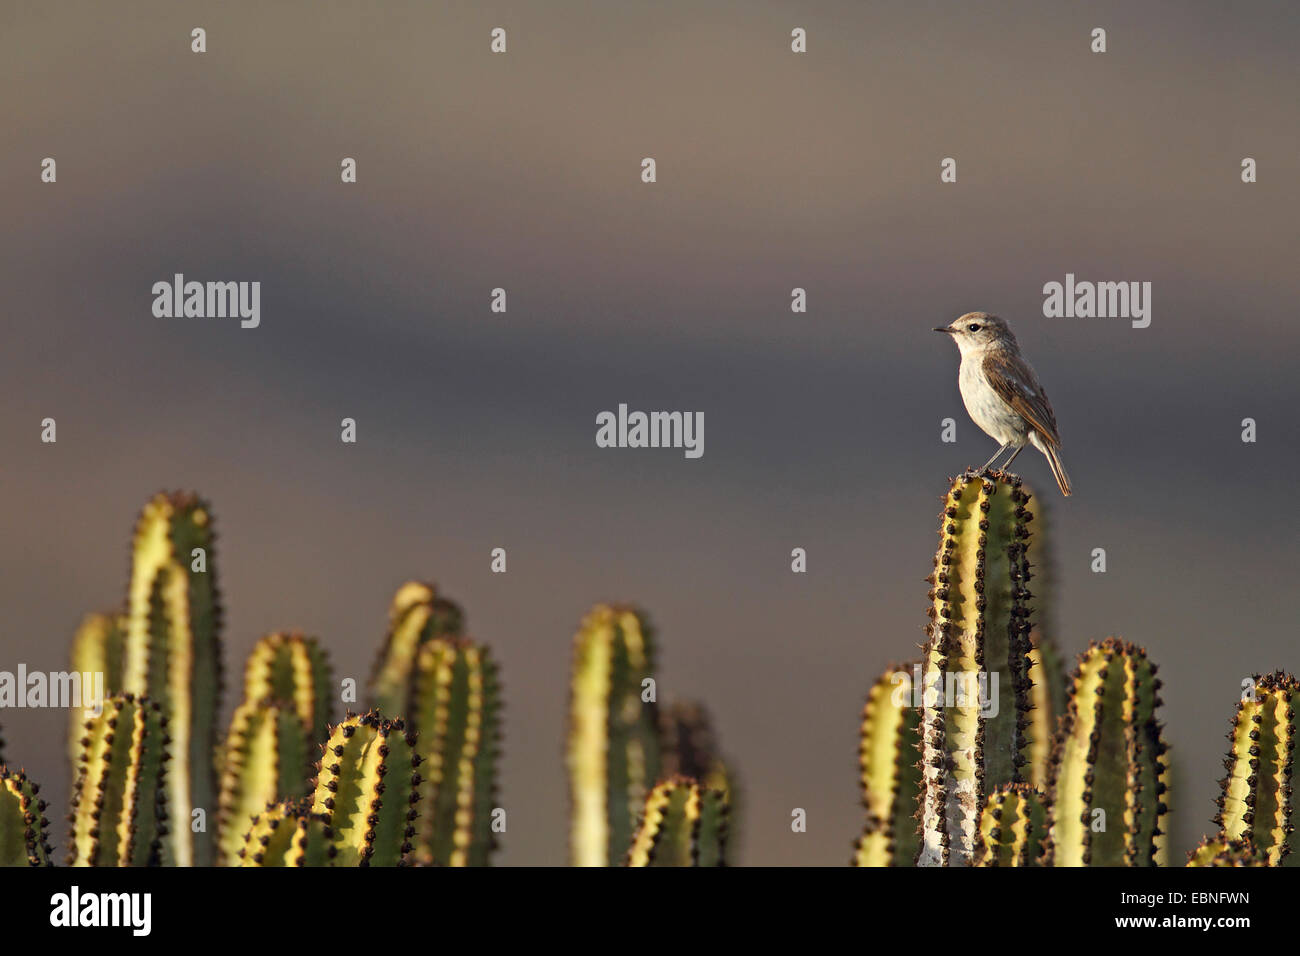 Canary islands chat (Saxicola dacotiae), female sitting on candelabra tree, Canary Islands, Fuerteventura Stock Photo